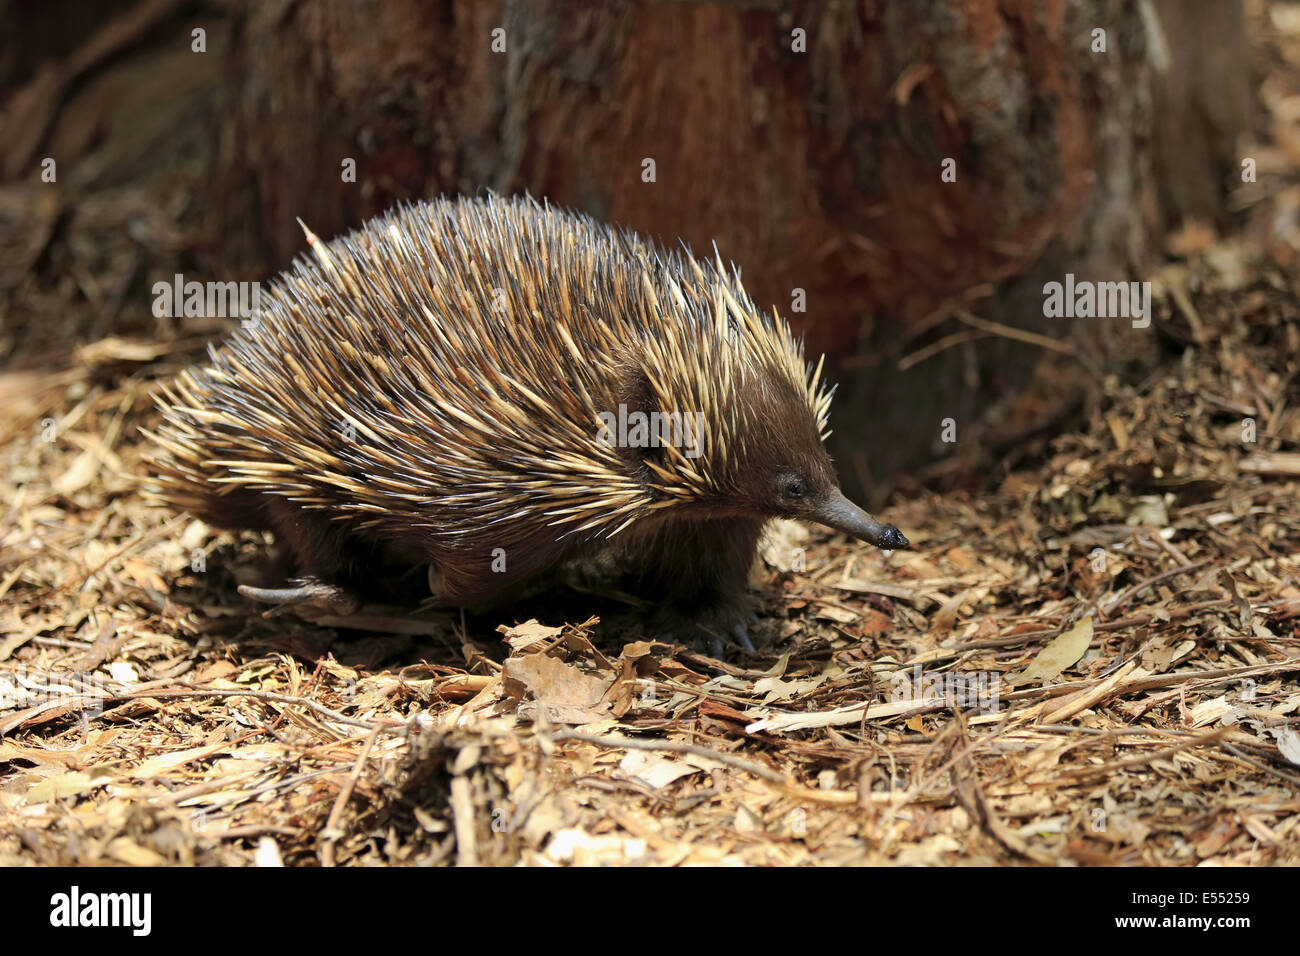 Short-nosed Echidna (Tachyglossus aculeatus) adult, foraging amongst leaf litter, South Australia, Australia, October Stock Photo